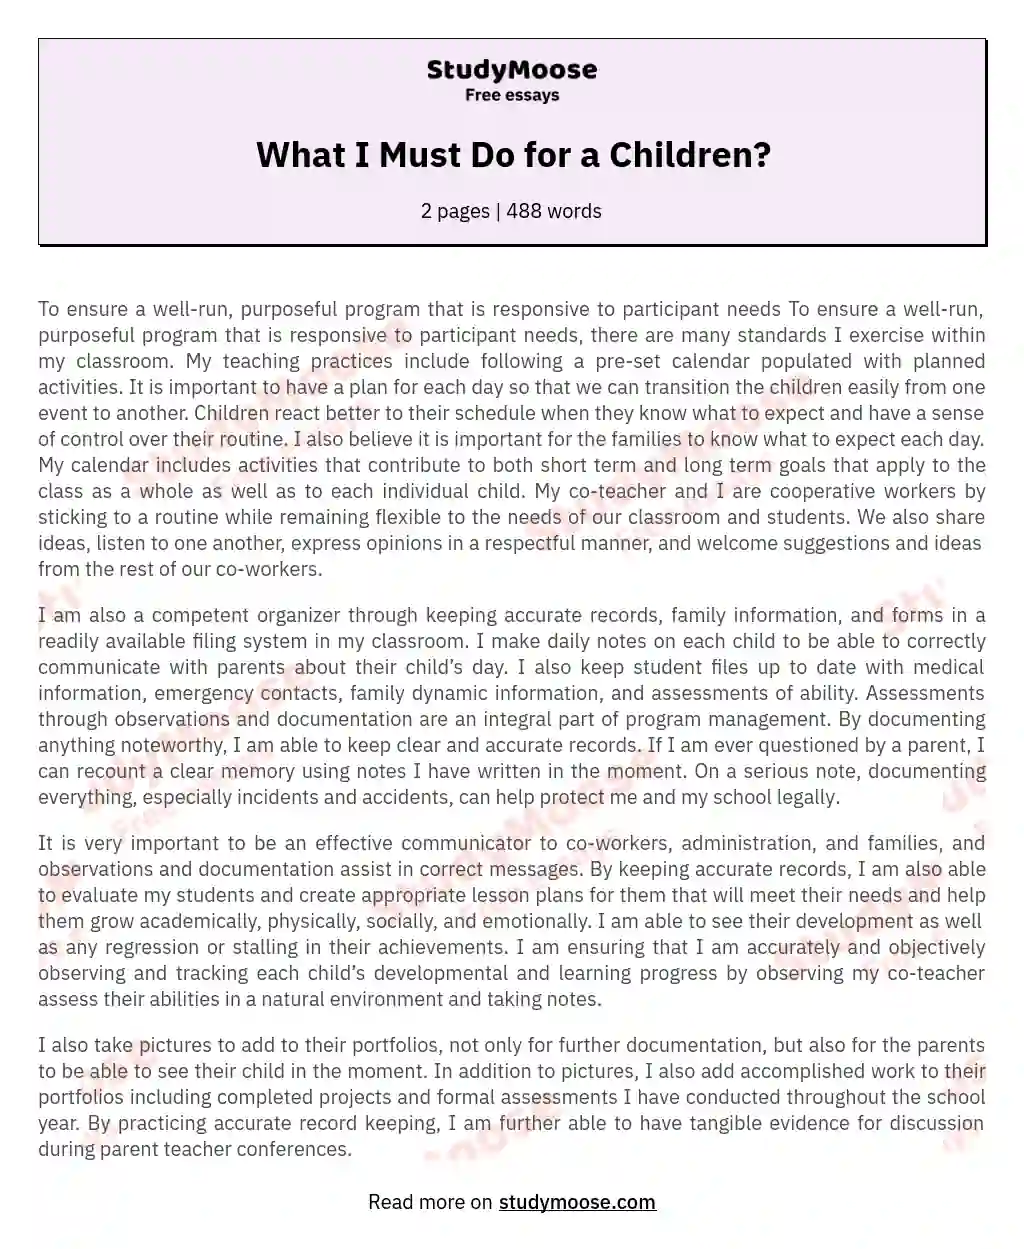 What I Must Do for a Children? essay